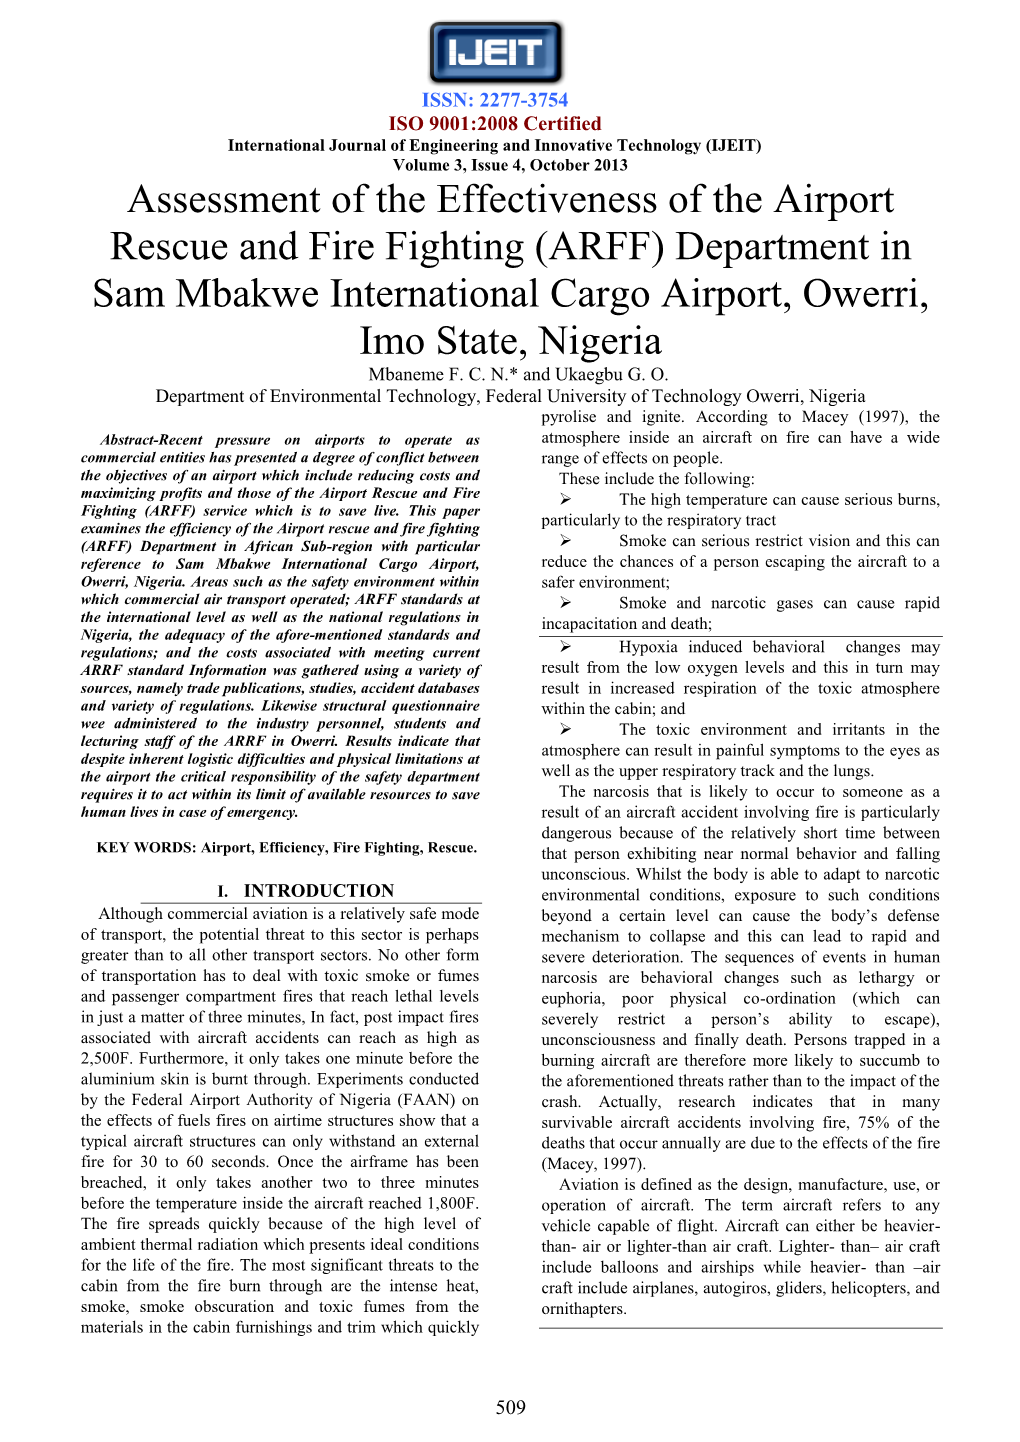 Assessment of the Effectiveness of the Airport Rescue and Fire Fighting